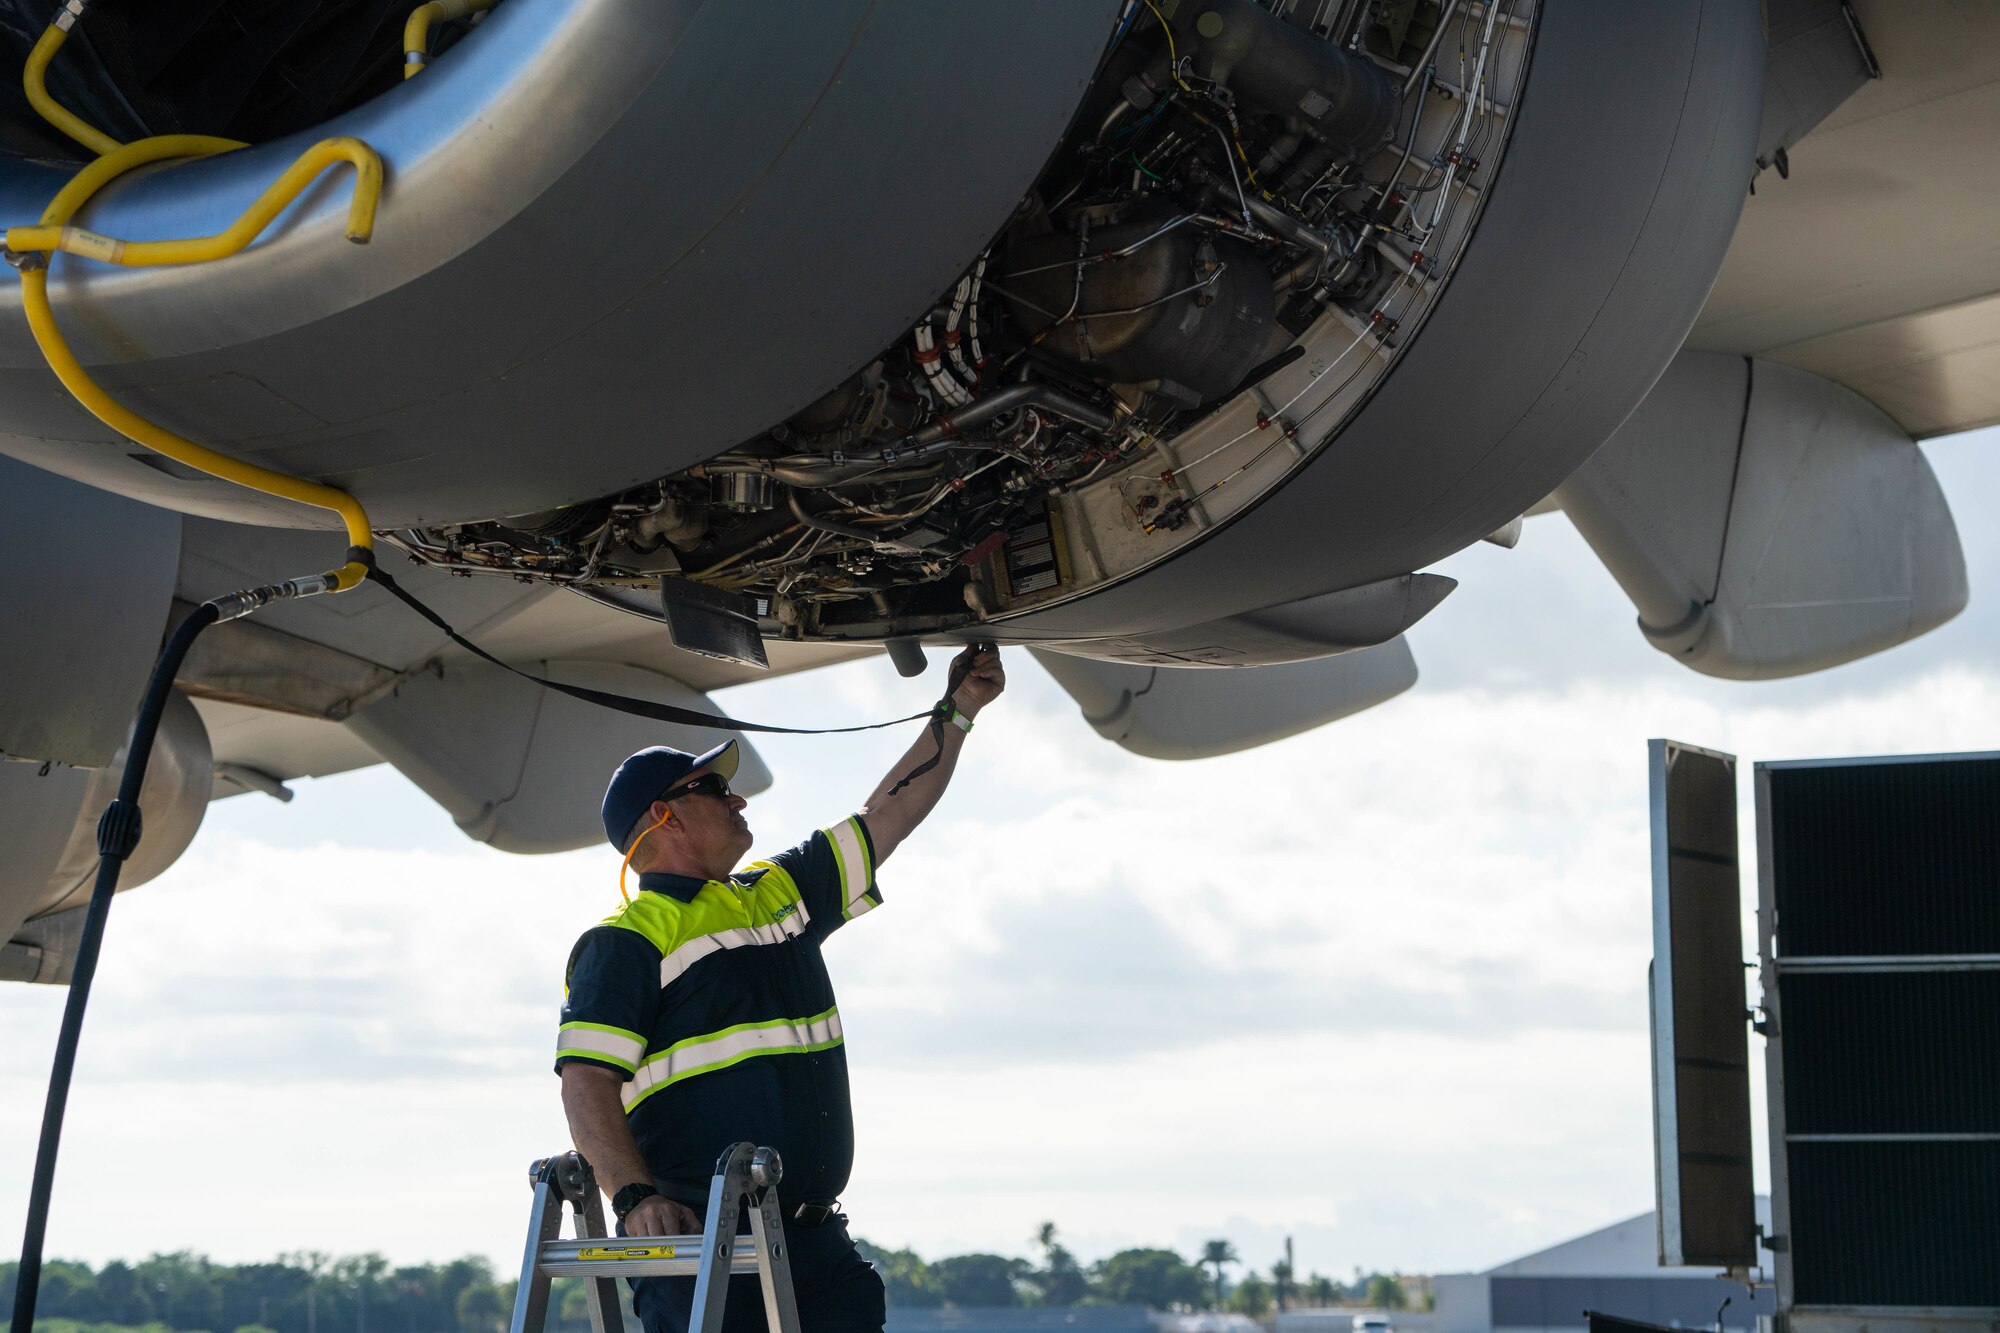 Leroy Moore, a contractor prepares the C-17 Globemaster III’s engines for an eco-wash at Joint Base Pearl Harbor-Hickam, Hawaii, November 18, 2021. C-17’s engines routinely receive this wash to prevent corrosion and to help with fuel efficiency and ensure the engines perform at a high level. (U.S. Air Force photo by Airman 1st Class Makensie Cooper)